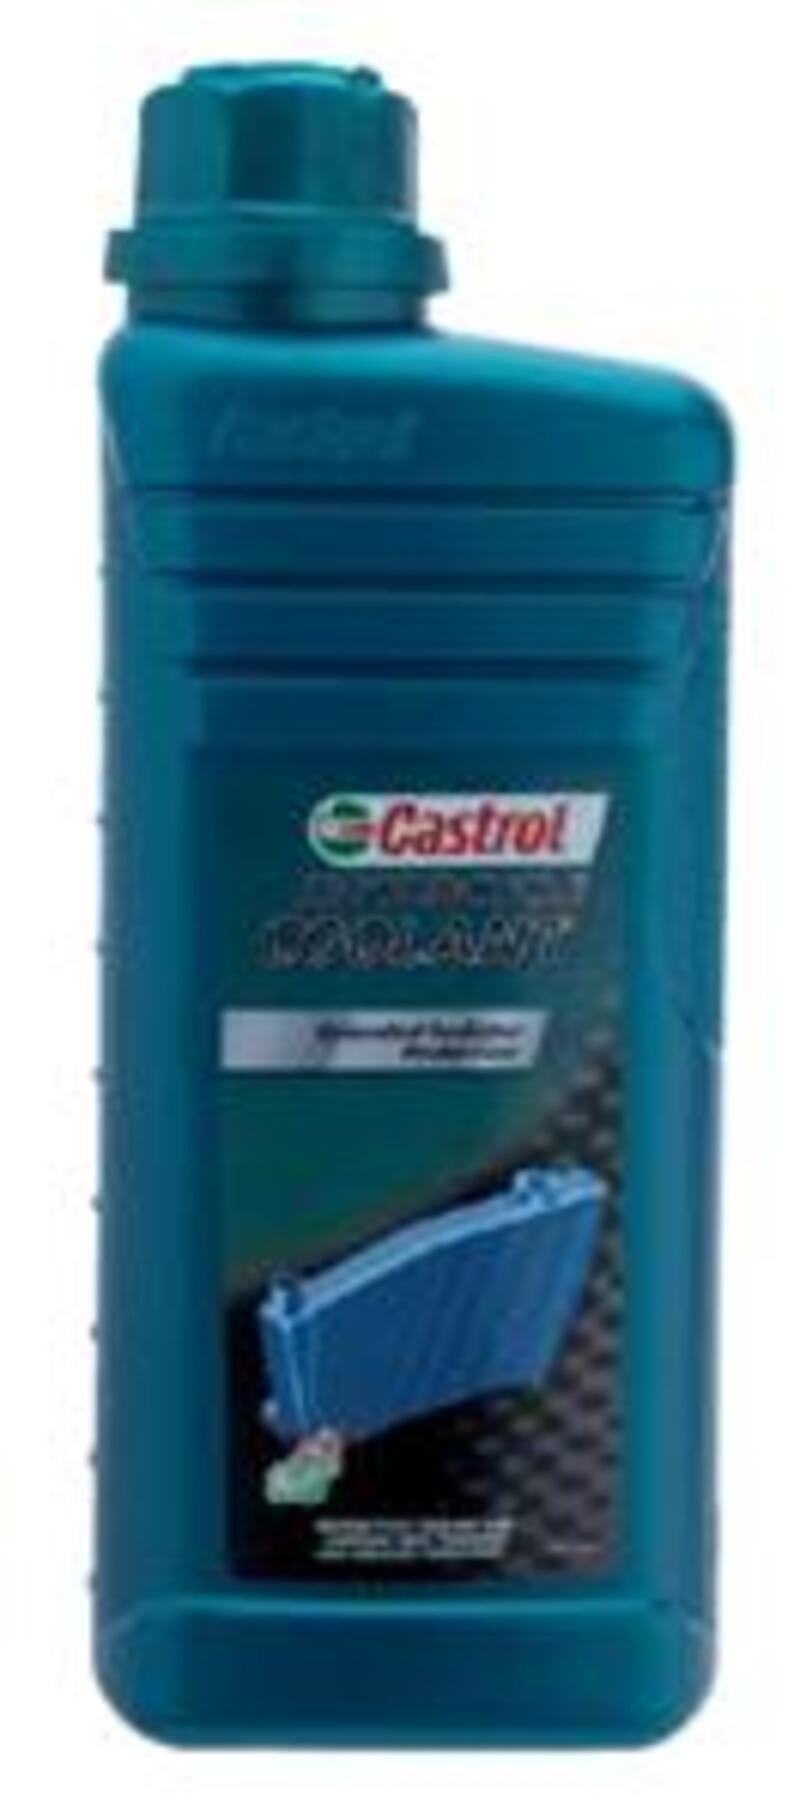 Castrol Motorcycle Coolant: l&#039;antigelo per moto e scooter